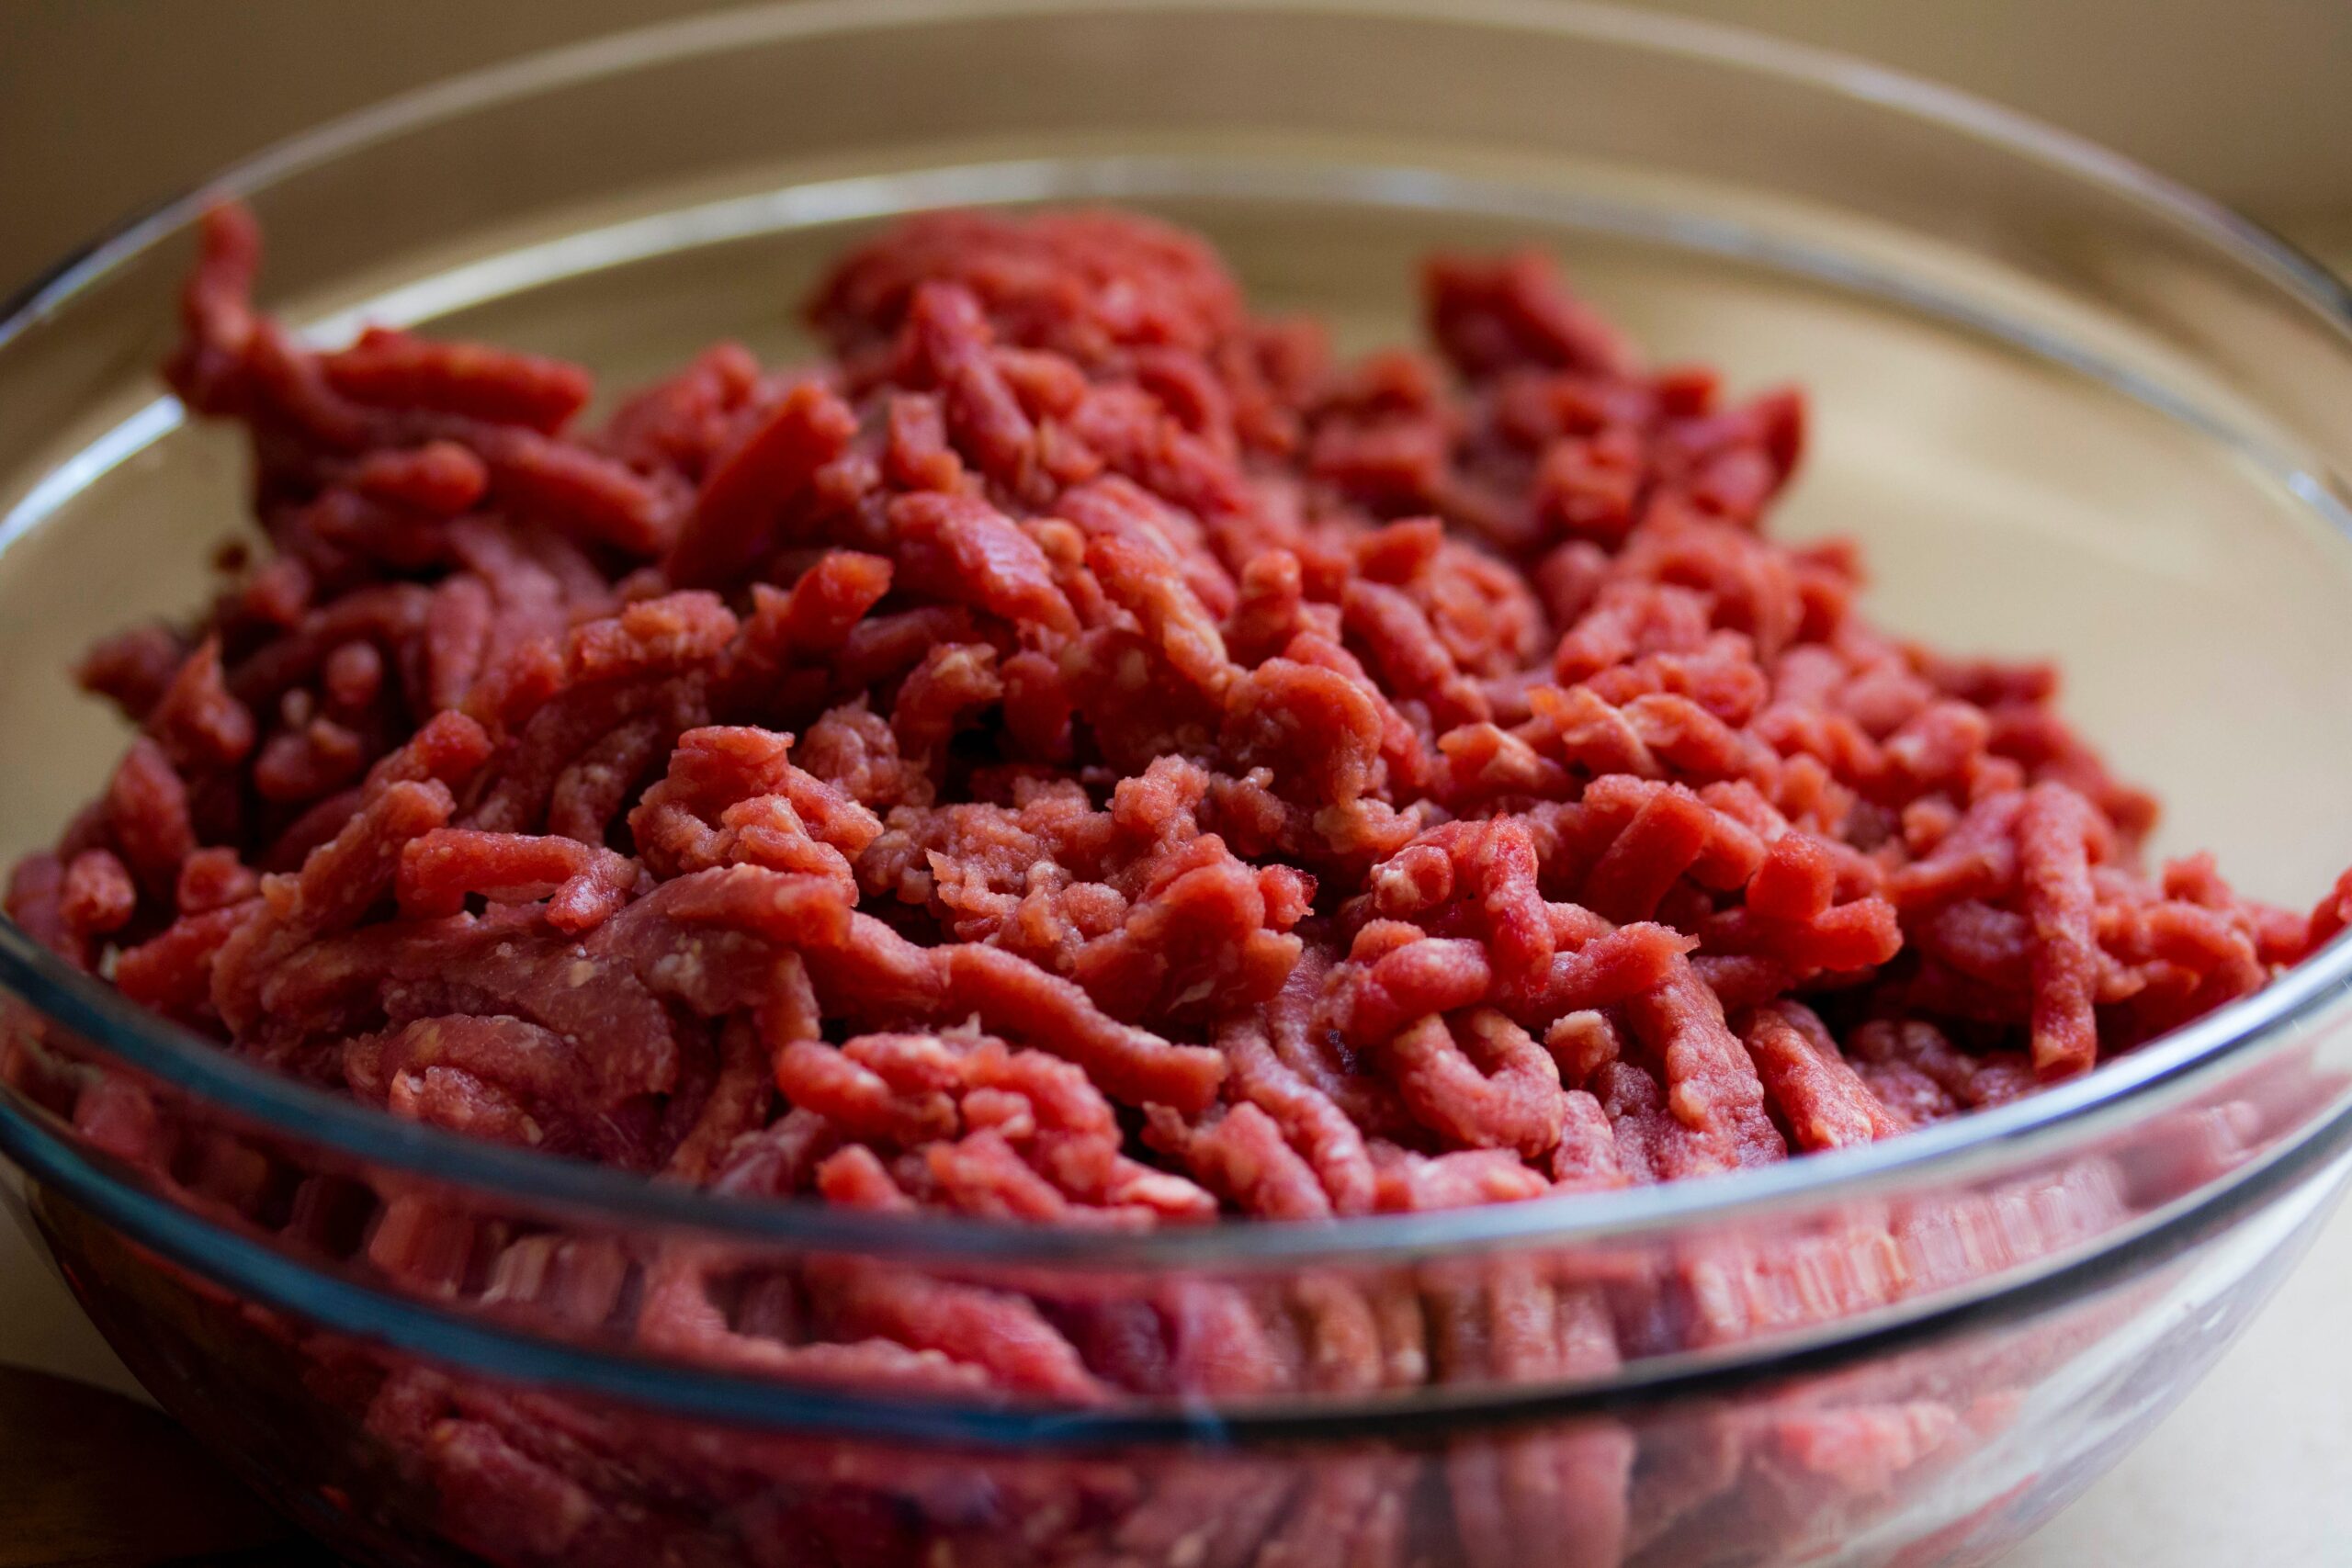 How Long is Cooked Ground Beef Good For?